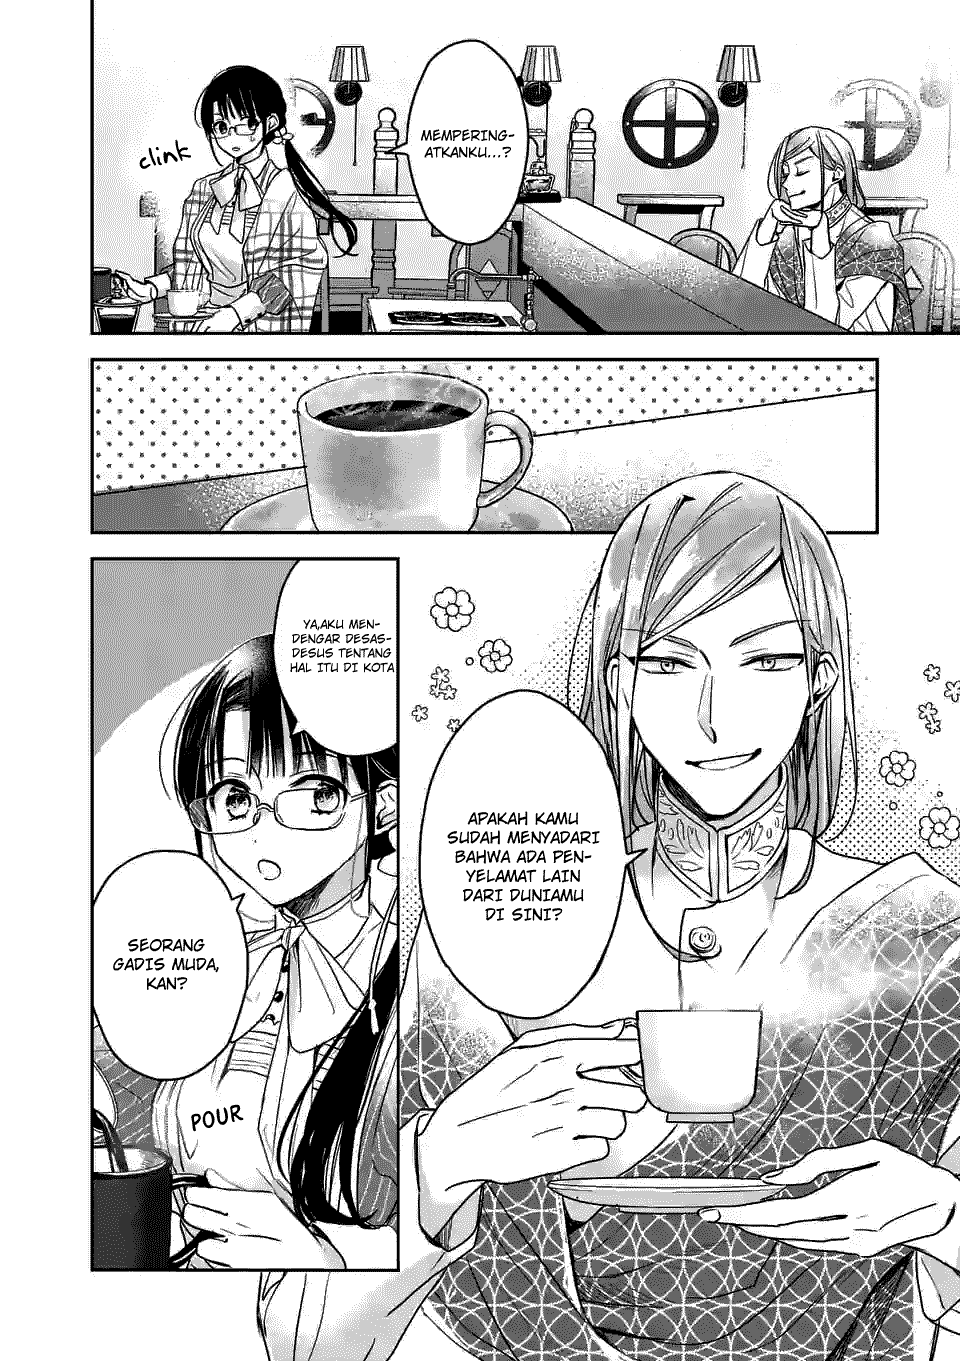 The Savior’s Book Café in Another World Chapter 6